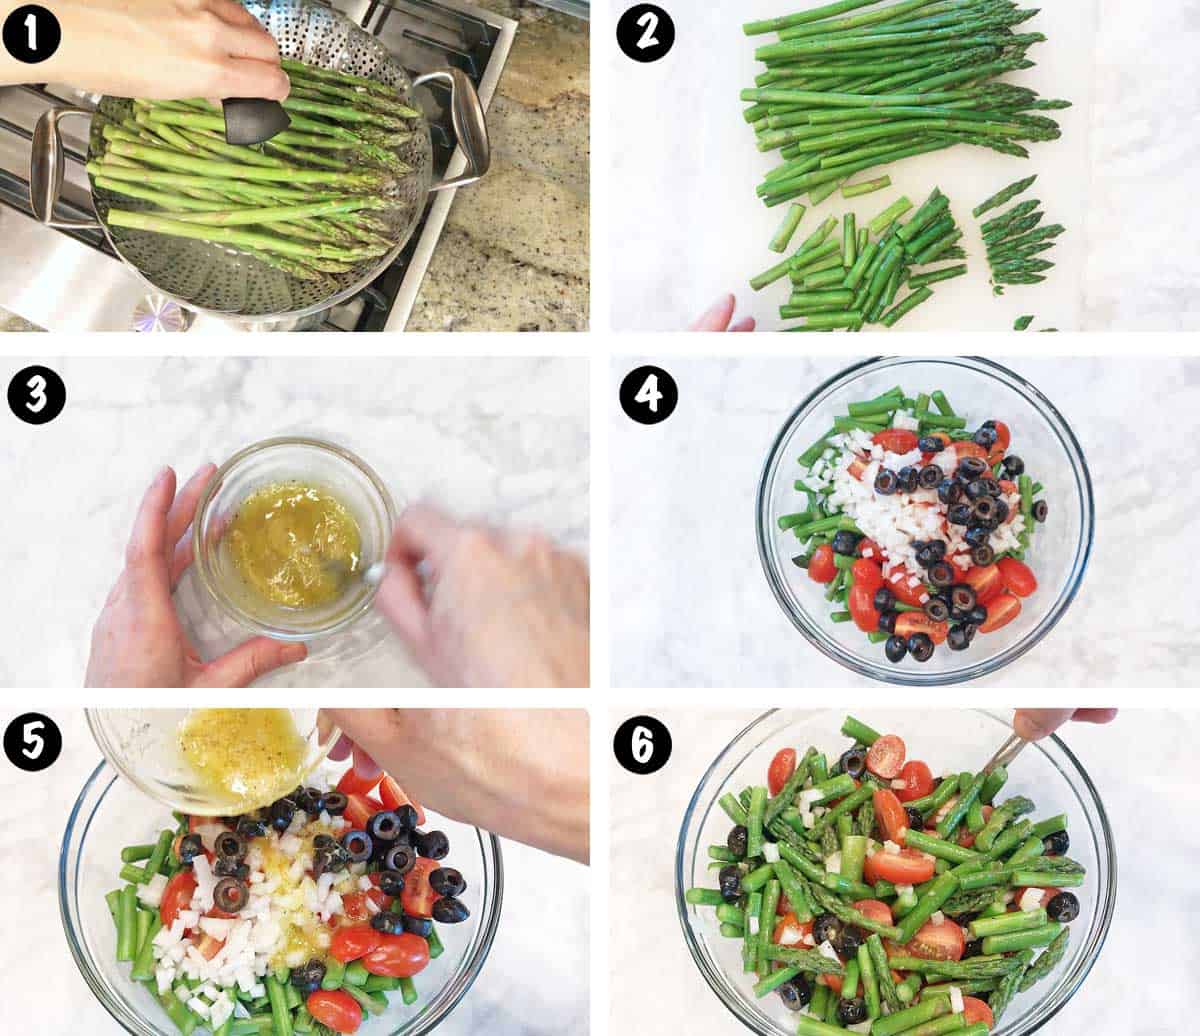 A photo collage showing the steps for making asparagus salad. 